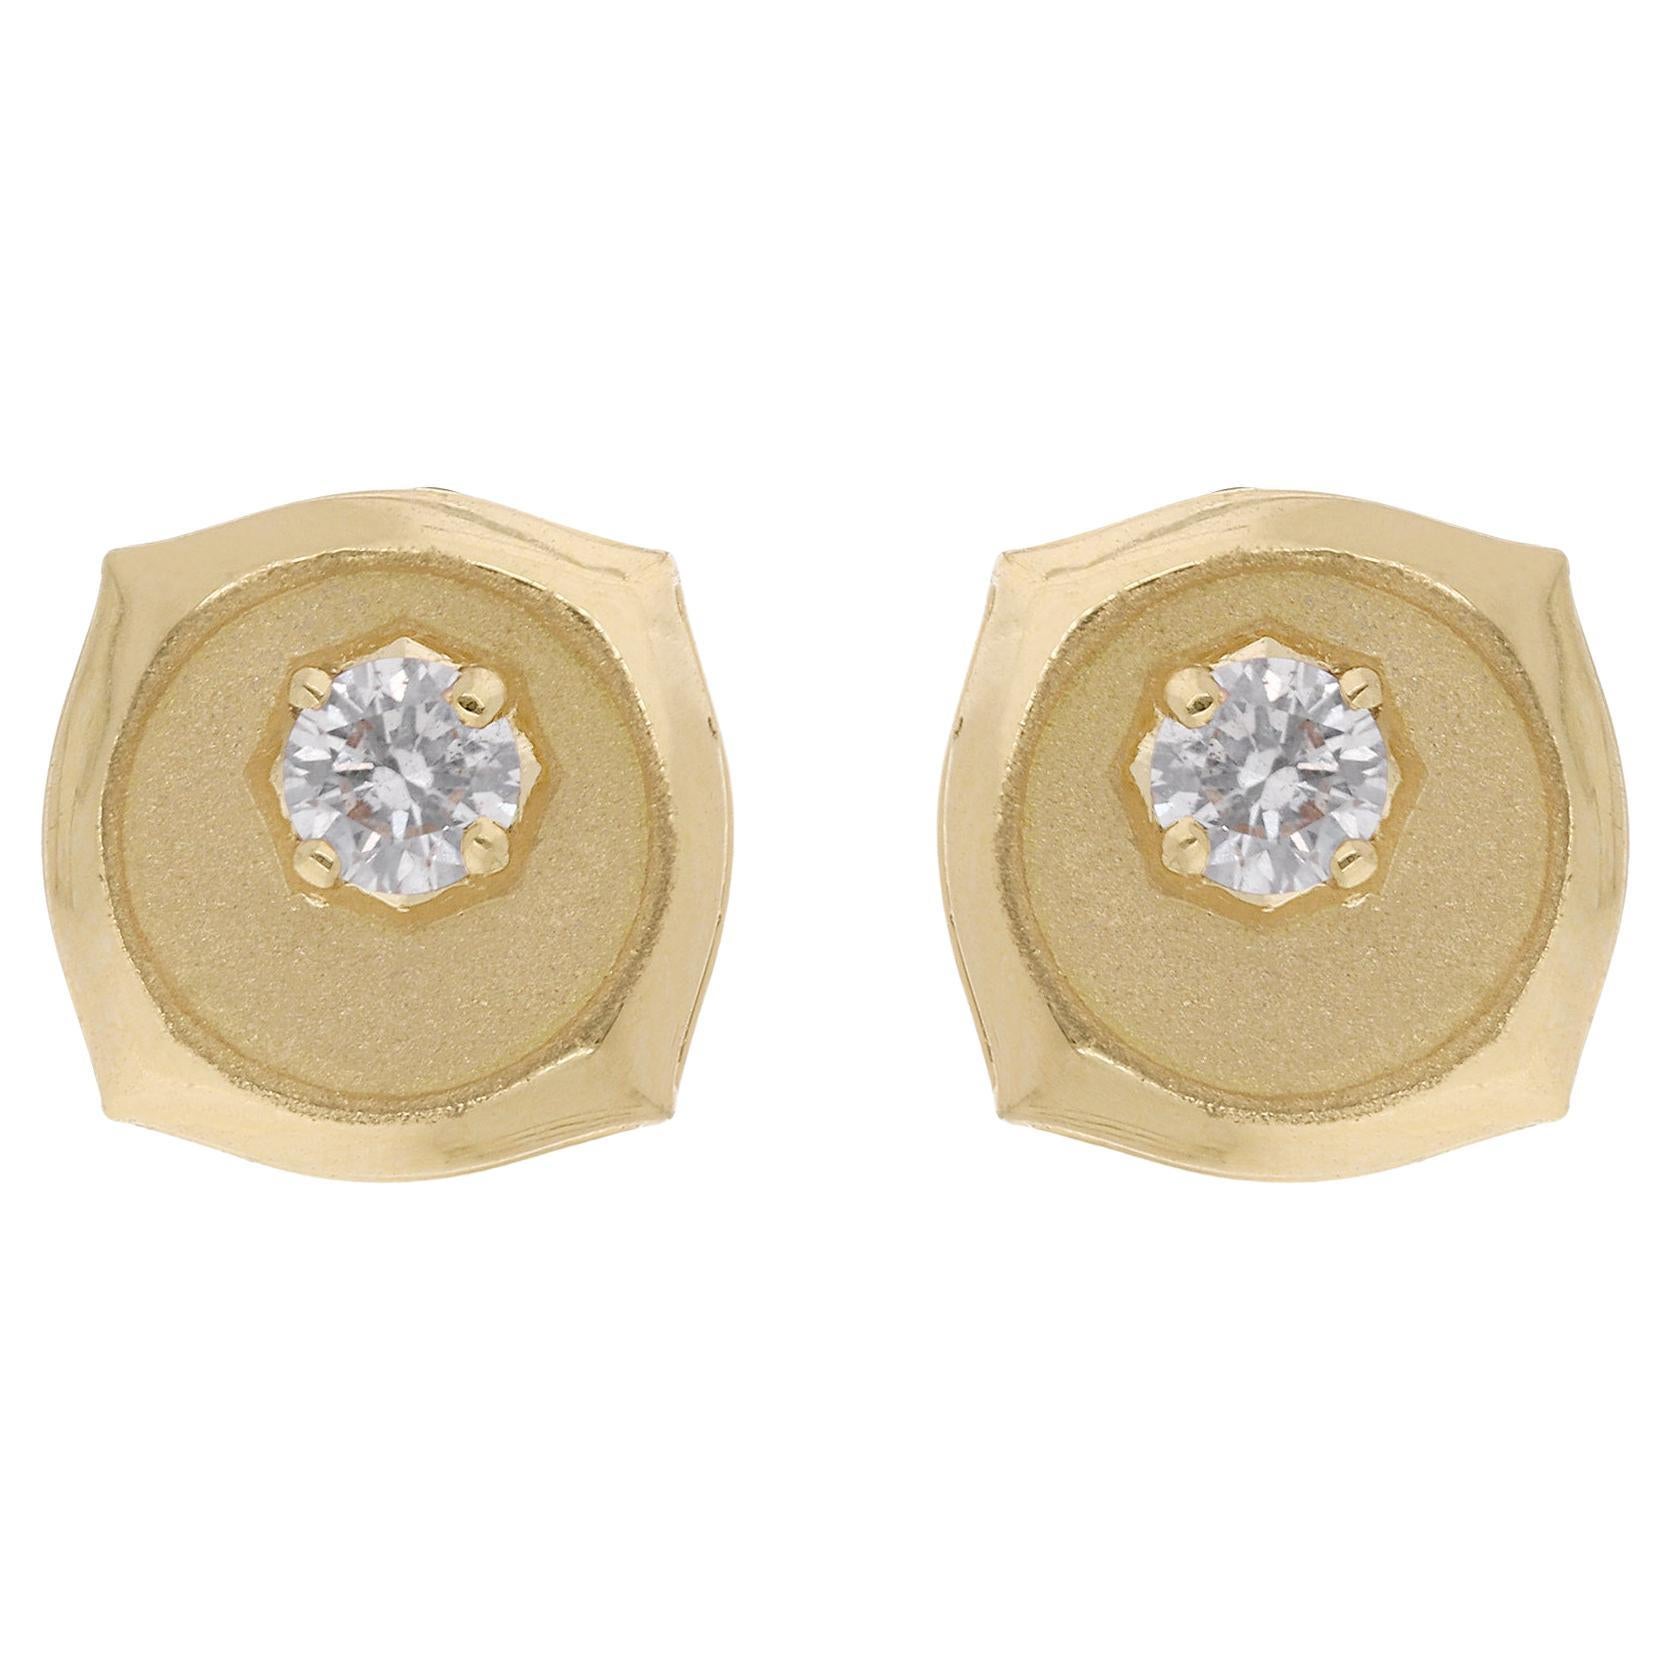 0.18 Ct Round Cut Natural Diamond Earring Studs 14K Solid Yellow